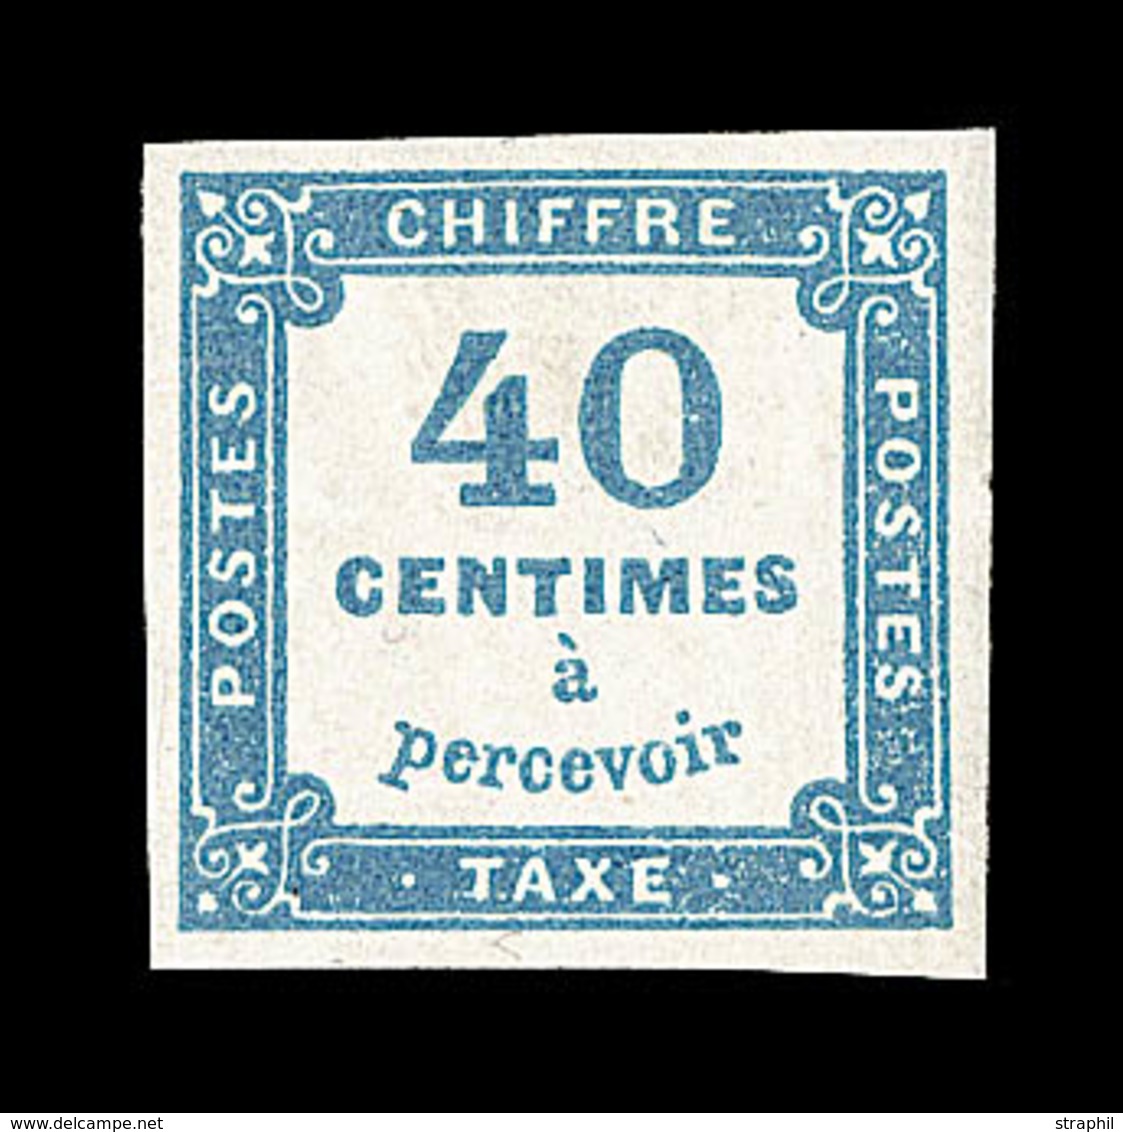 * TIMBRES TAXE - * - N°7 - 40c Bleu - TB - 1859-1959 Used